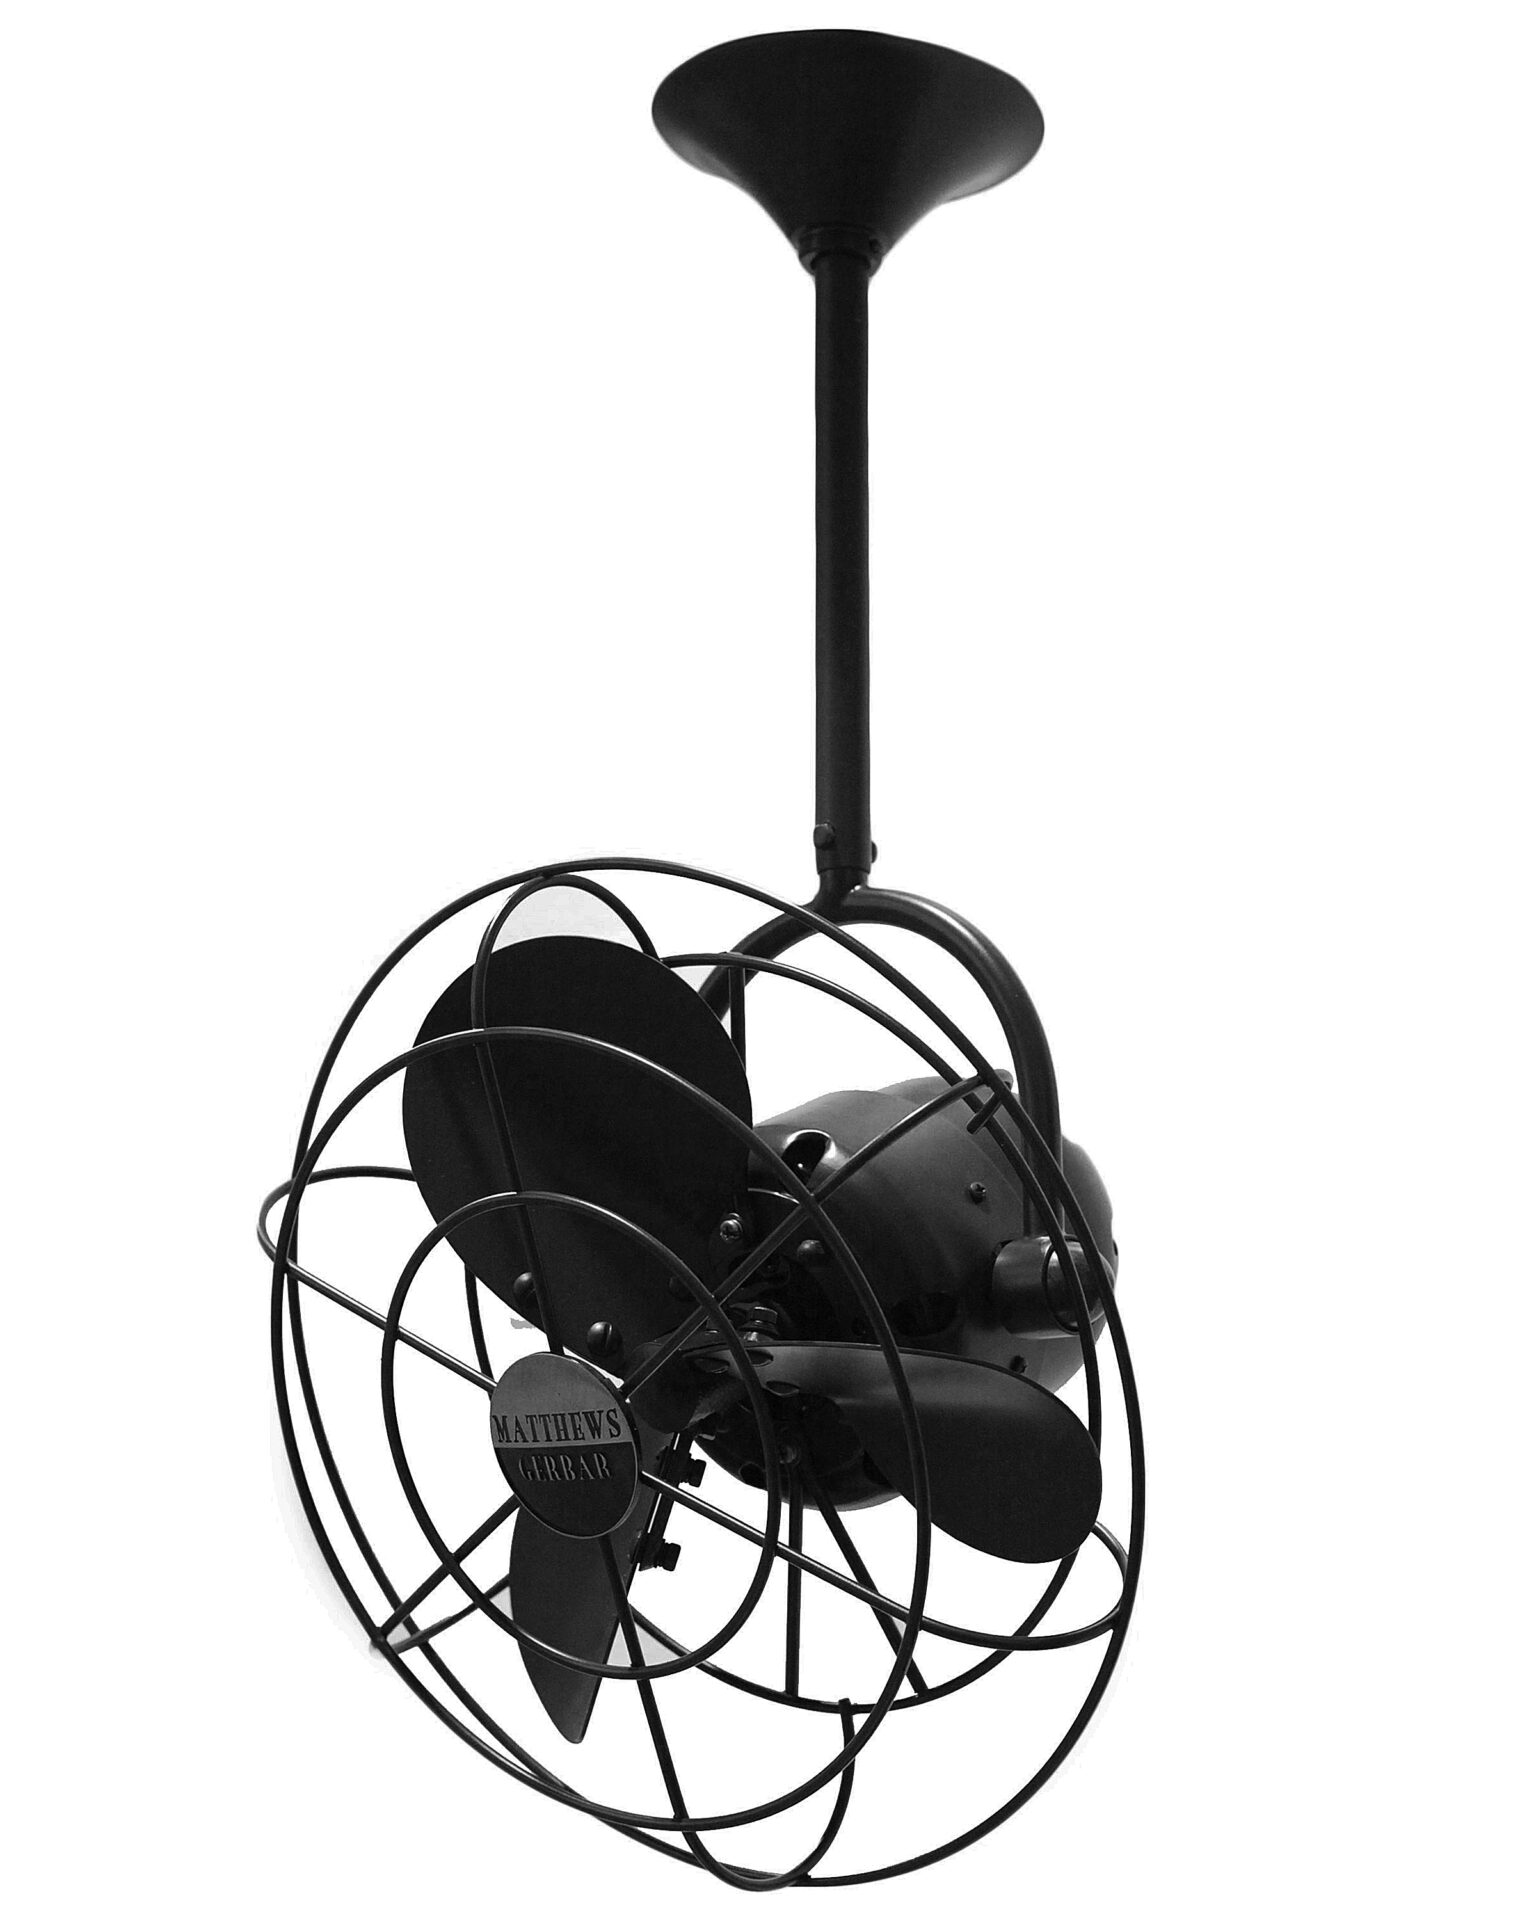 Bianca Direcional Ceiling Fan in Black with Metal Blades and Decorative Cage